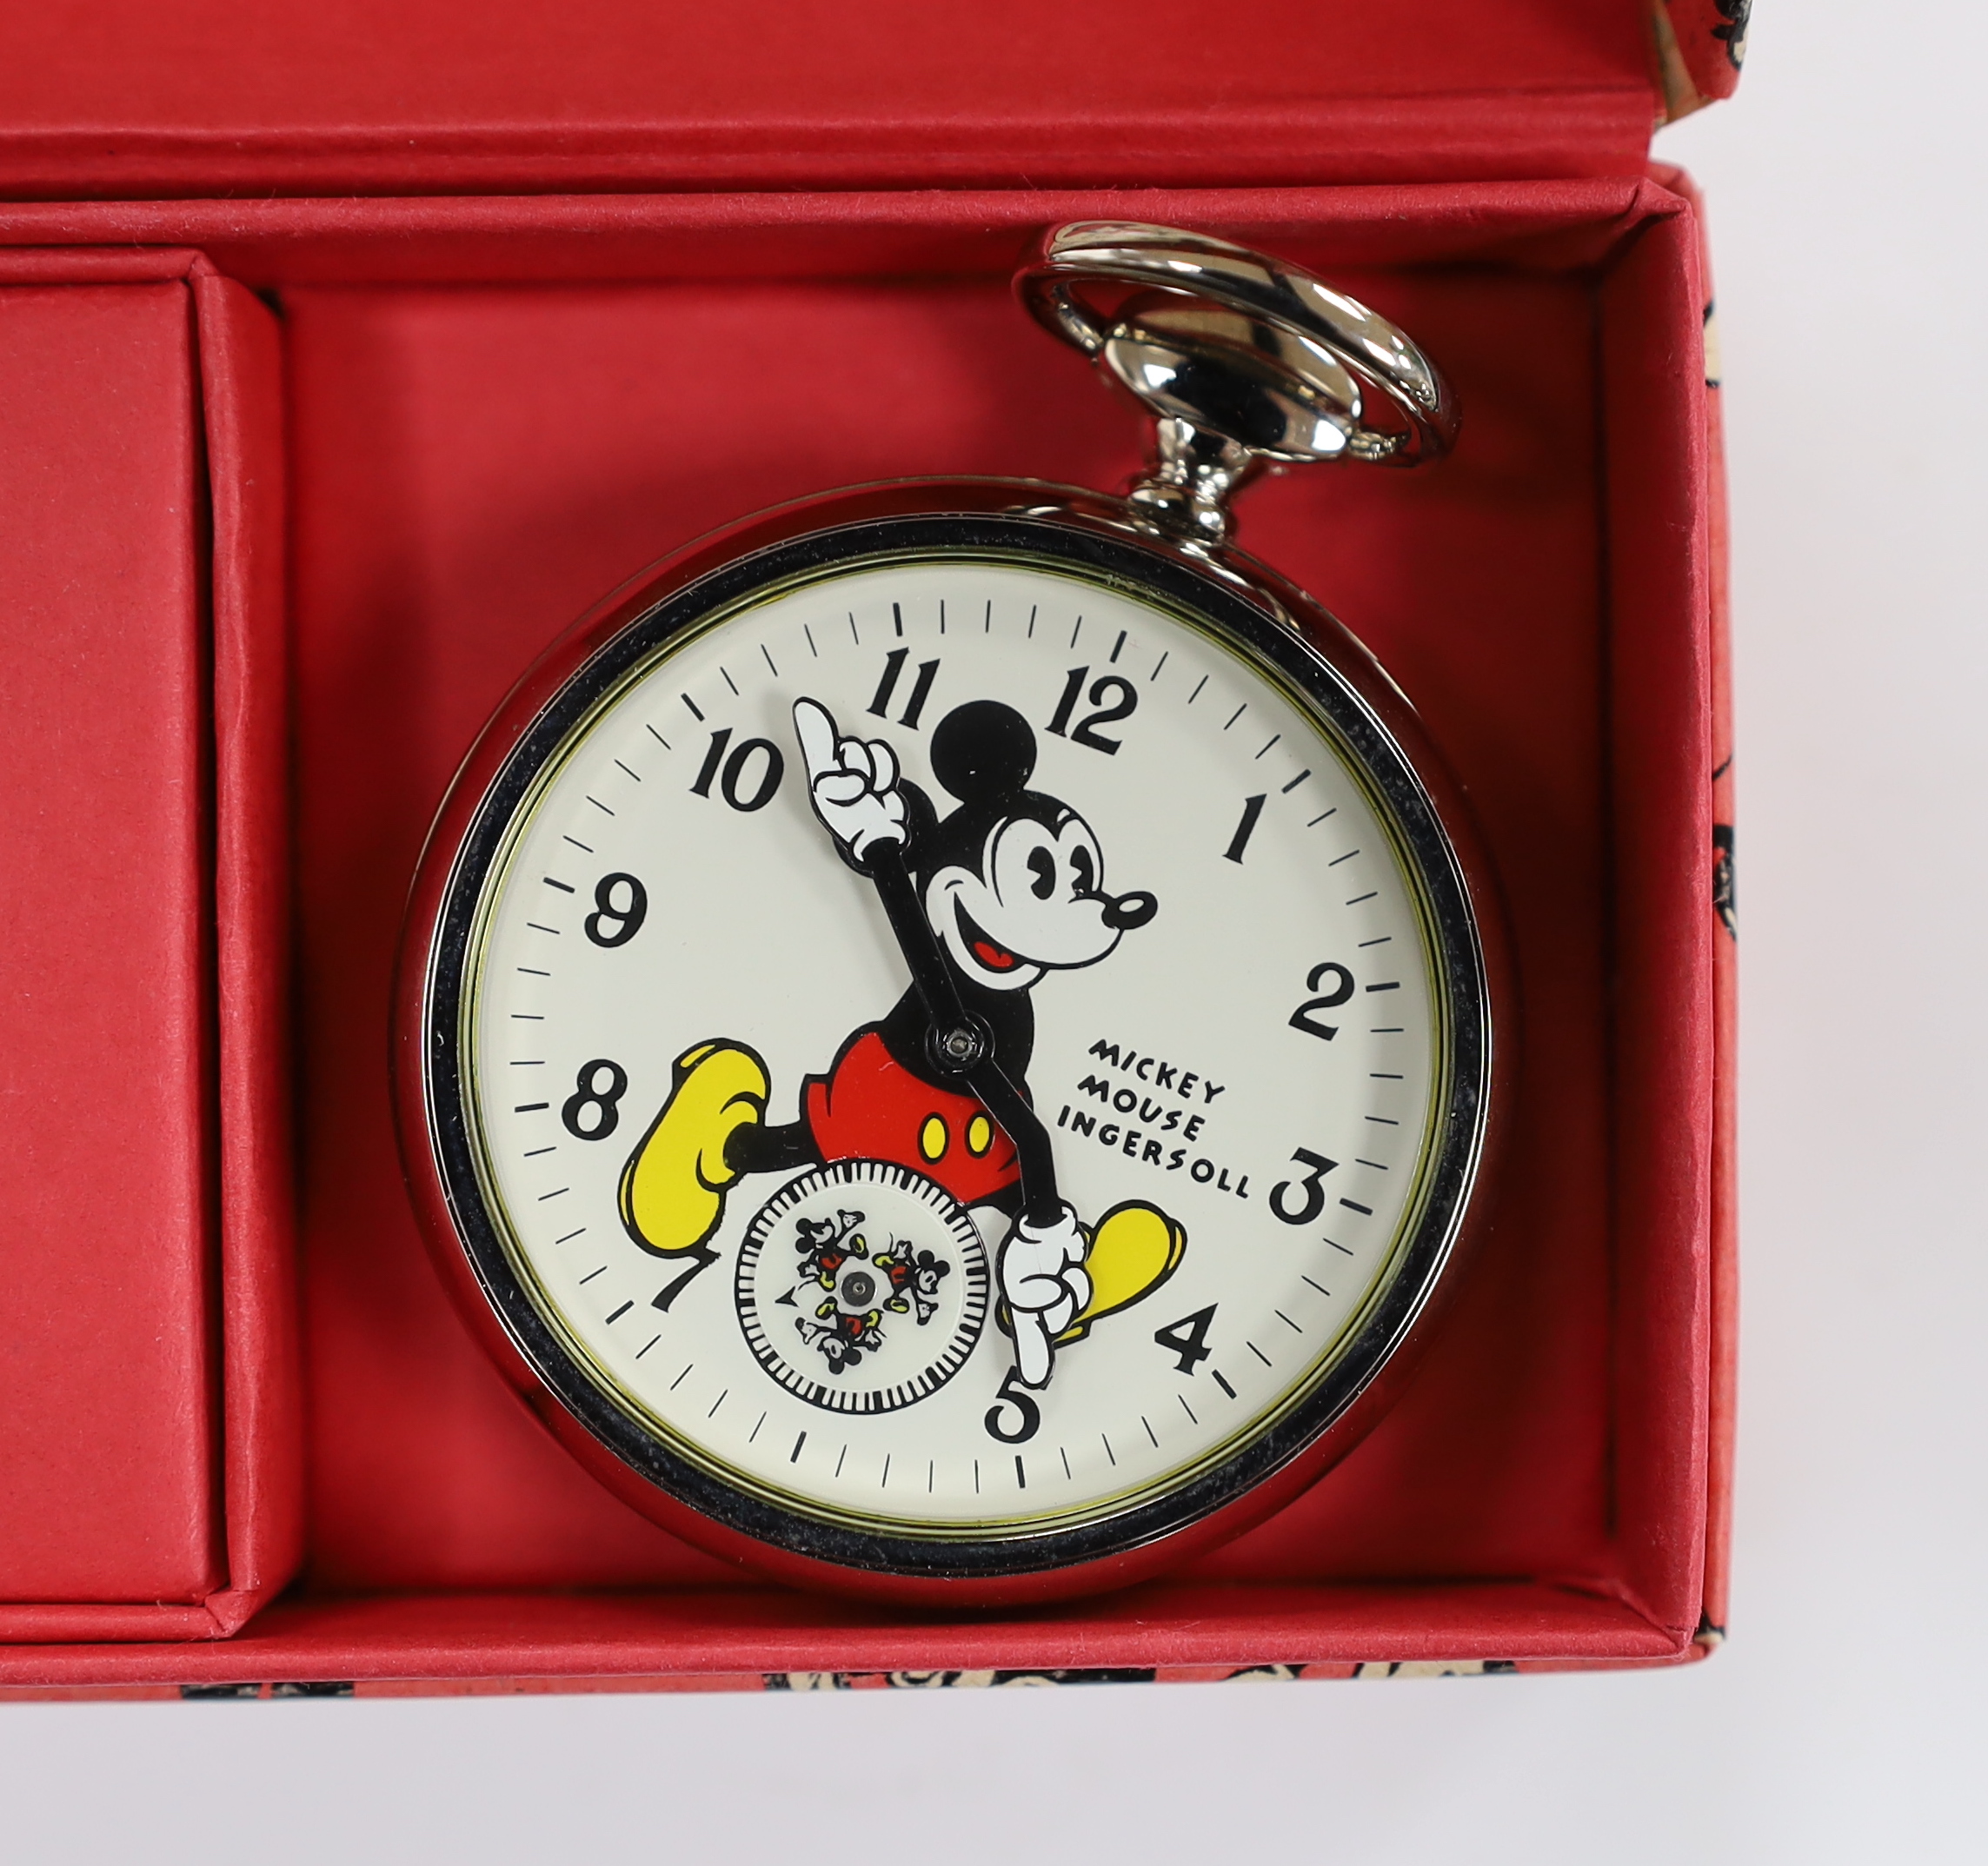 A boxed limited edition Ingersoll Watch Company Mickey Mouse pocket watch and medallion, numbered 4013/5000, case diameter 44mm.